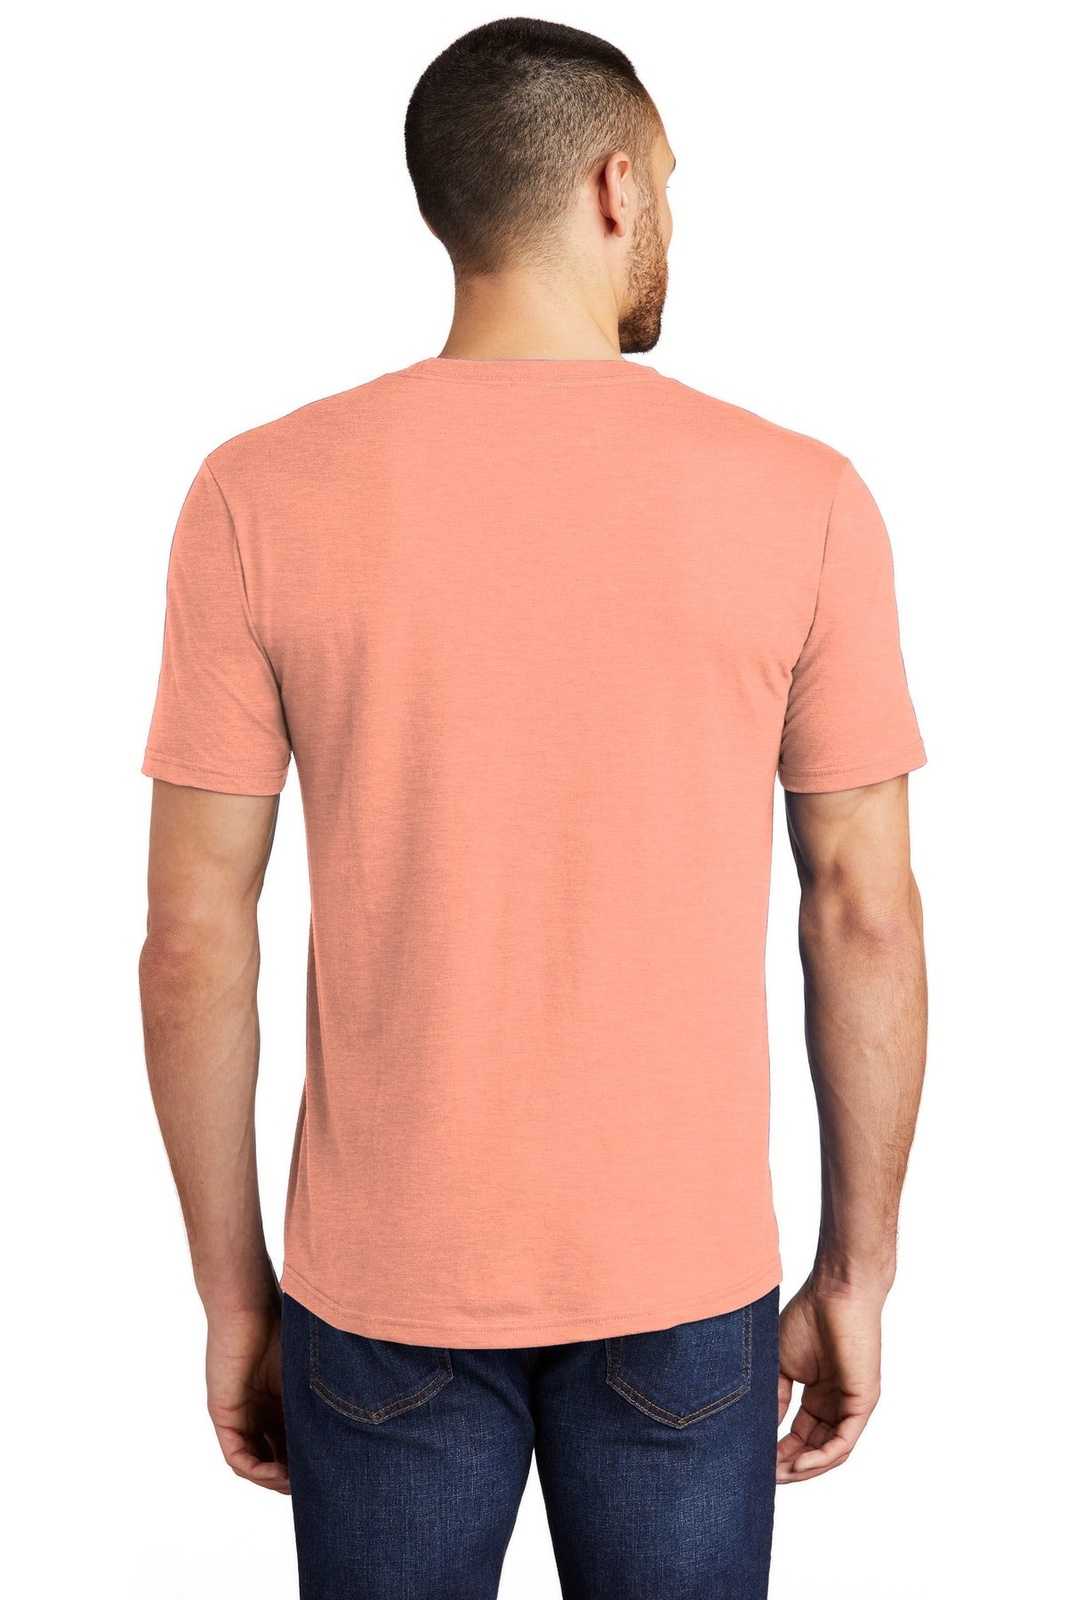 District DM130 Perfect Tri Tee - Heathered Dusty Peach - HIT a Double - 1